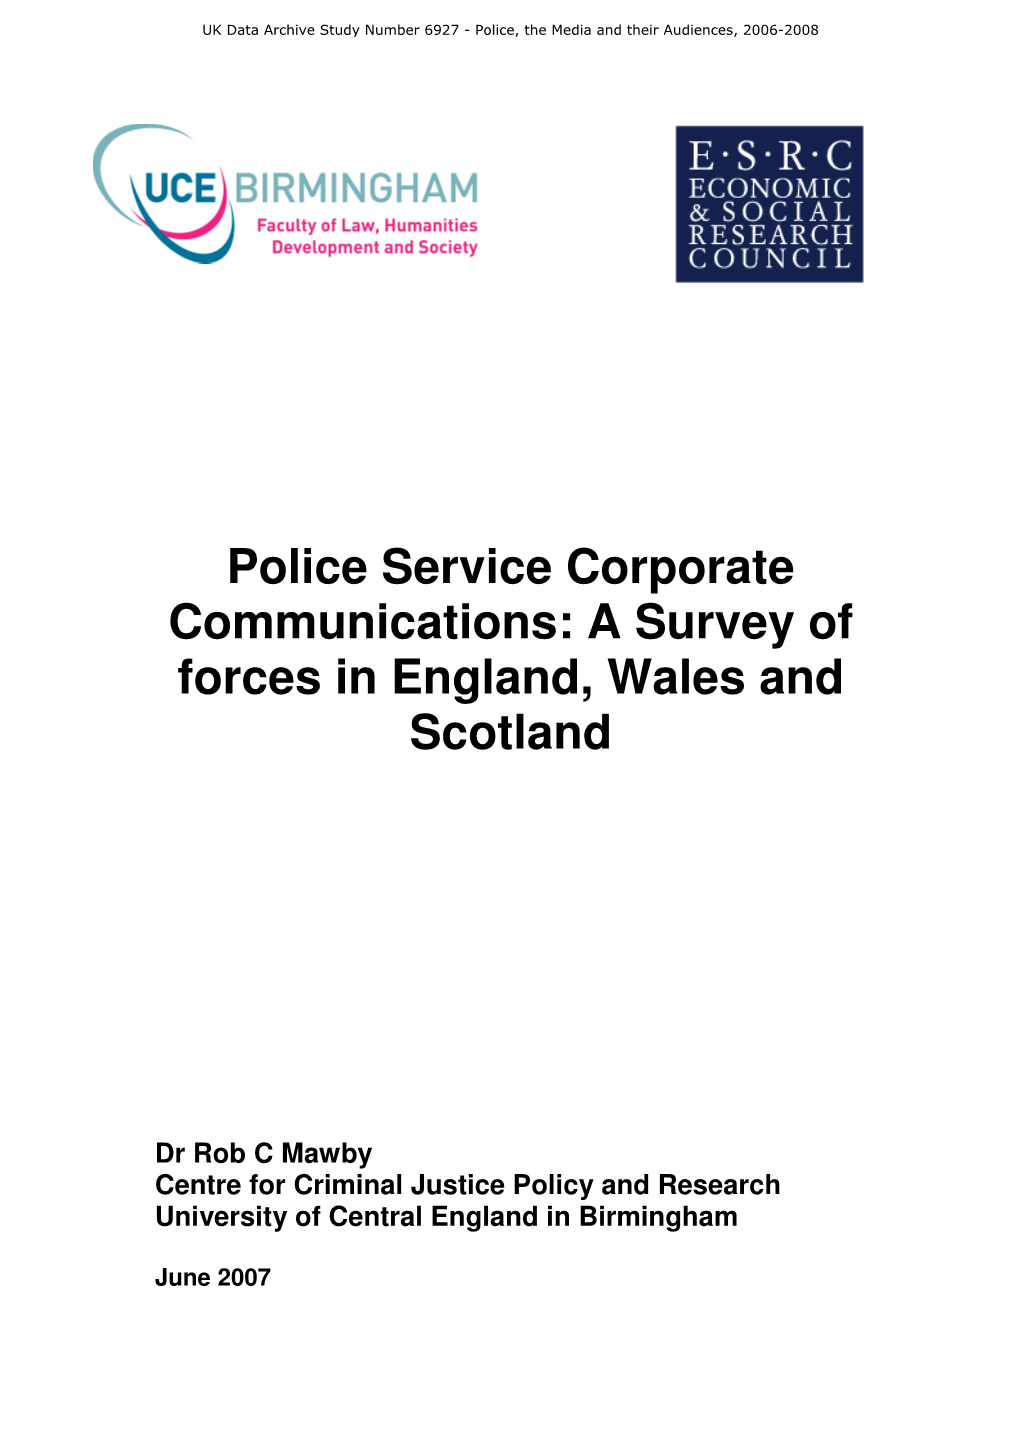 A Survey of Forces in England, Wales and Scotland